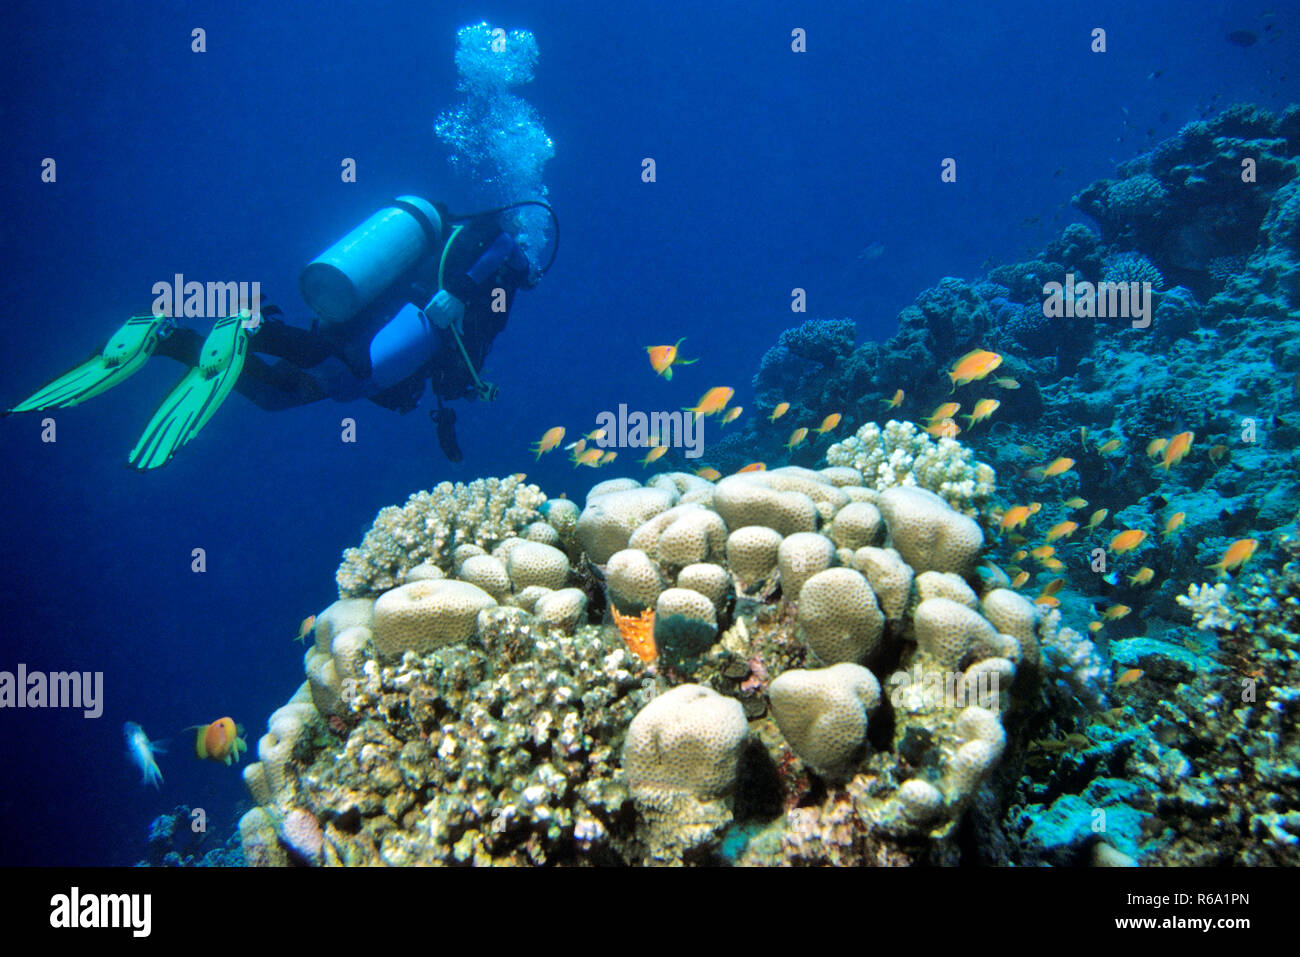 Scuba Diver At The Reefside, Red Sea Stock Photo